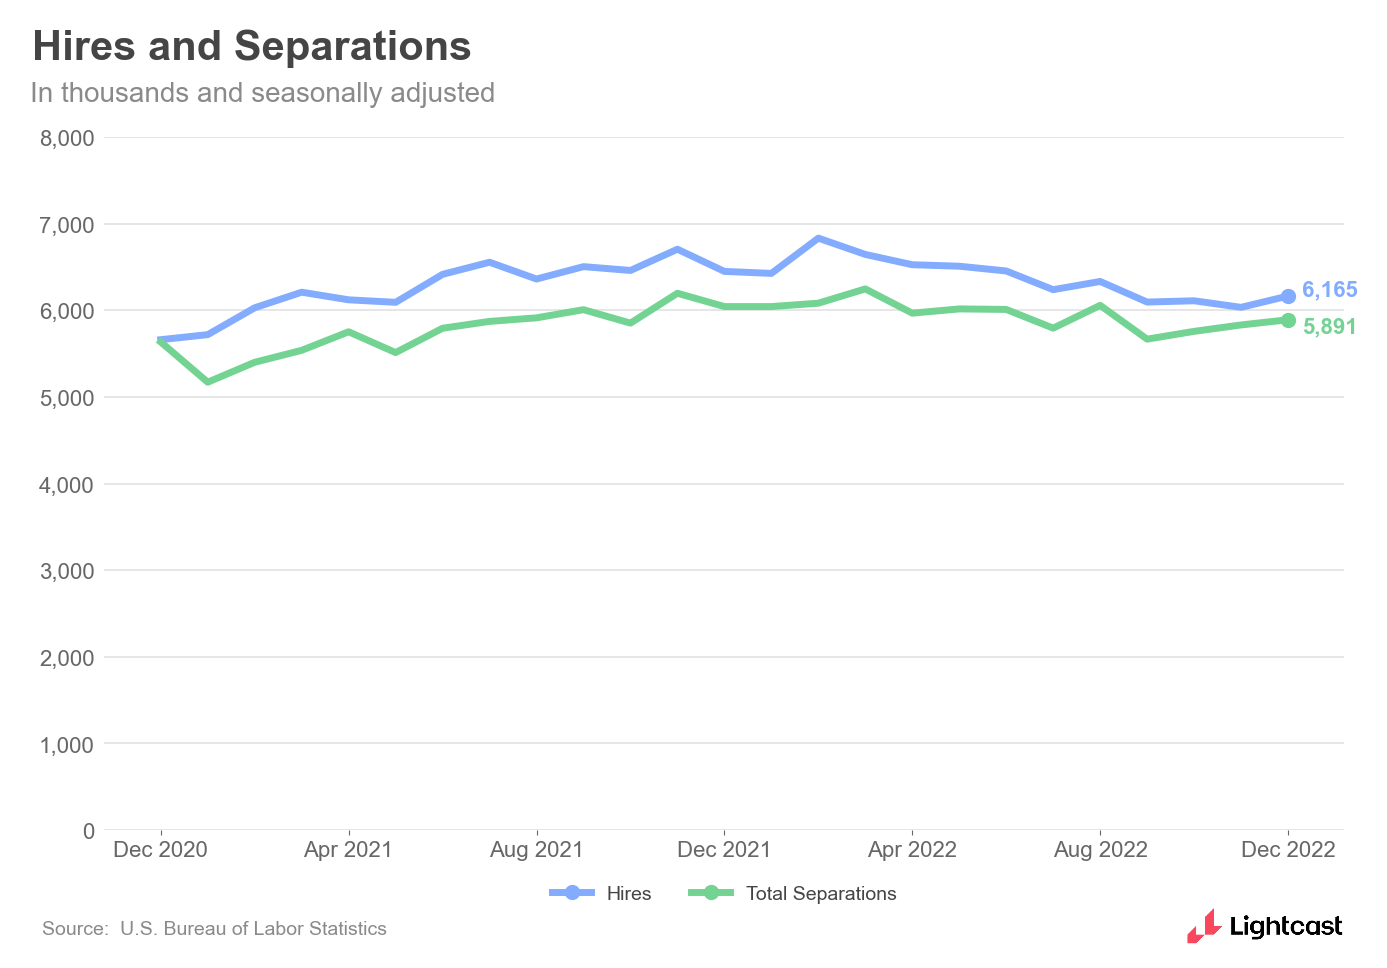 Hires and separations over time